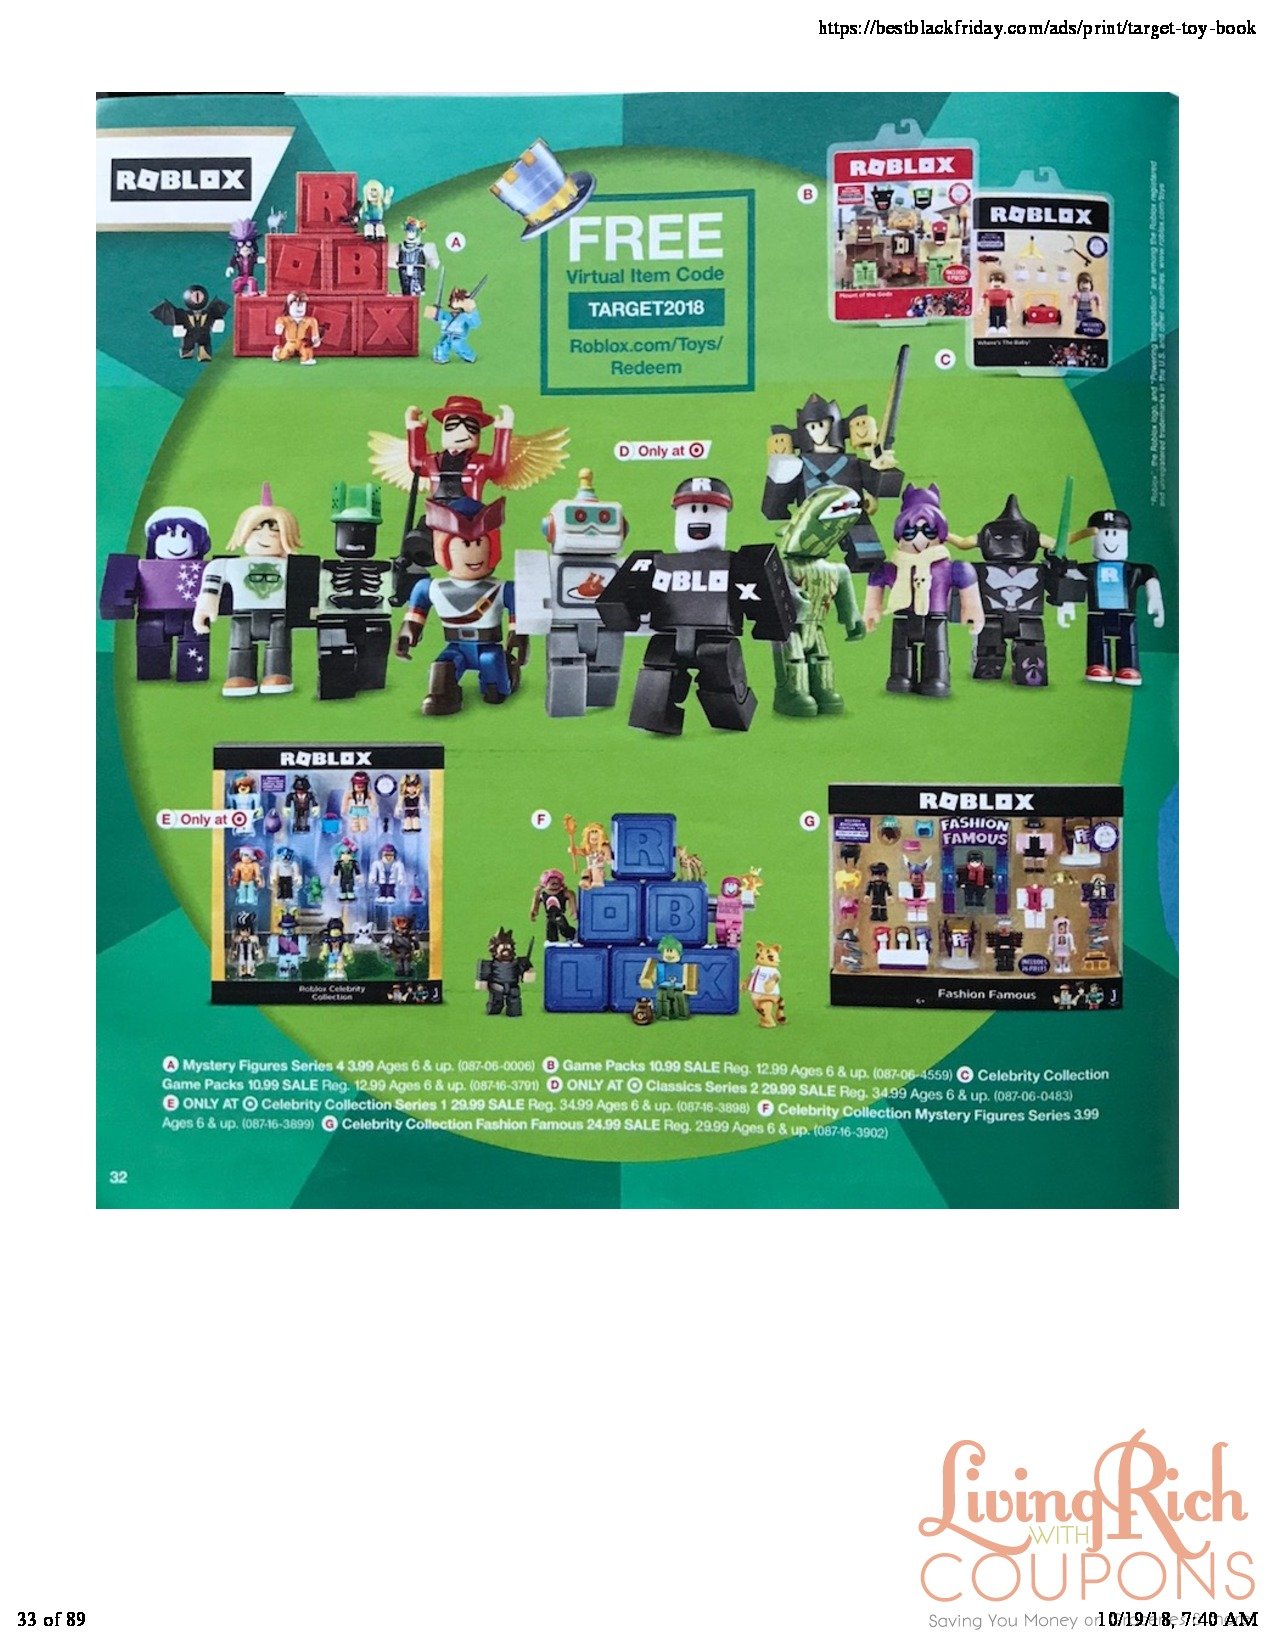 Target Toy Book 2018living Rich With Coupons - view the entire target black friday page with the black friday ad hours and deals here